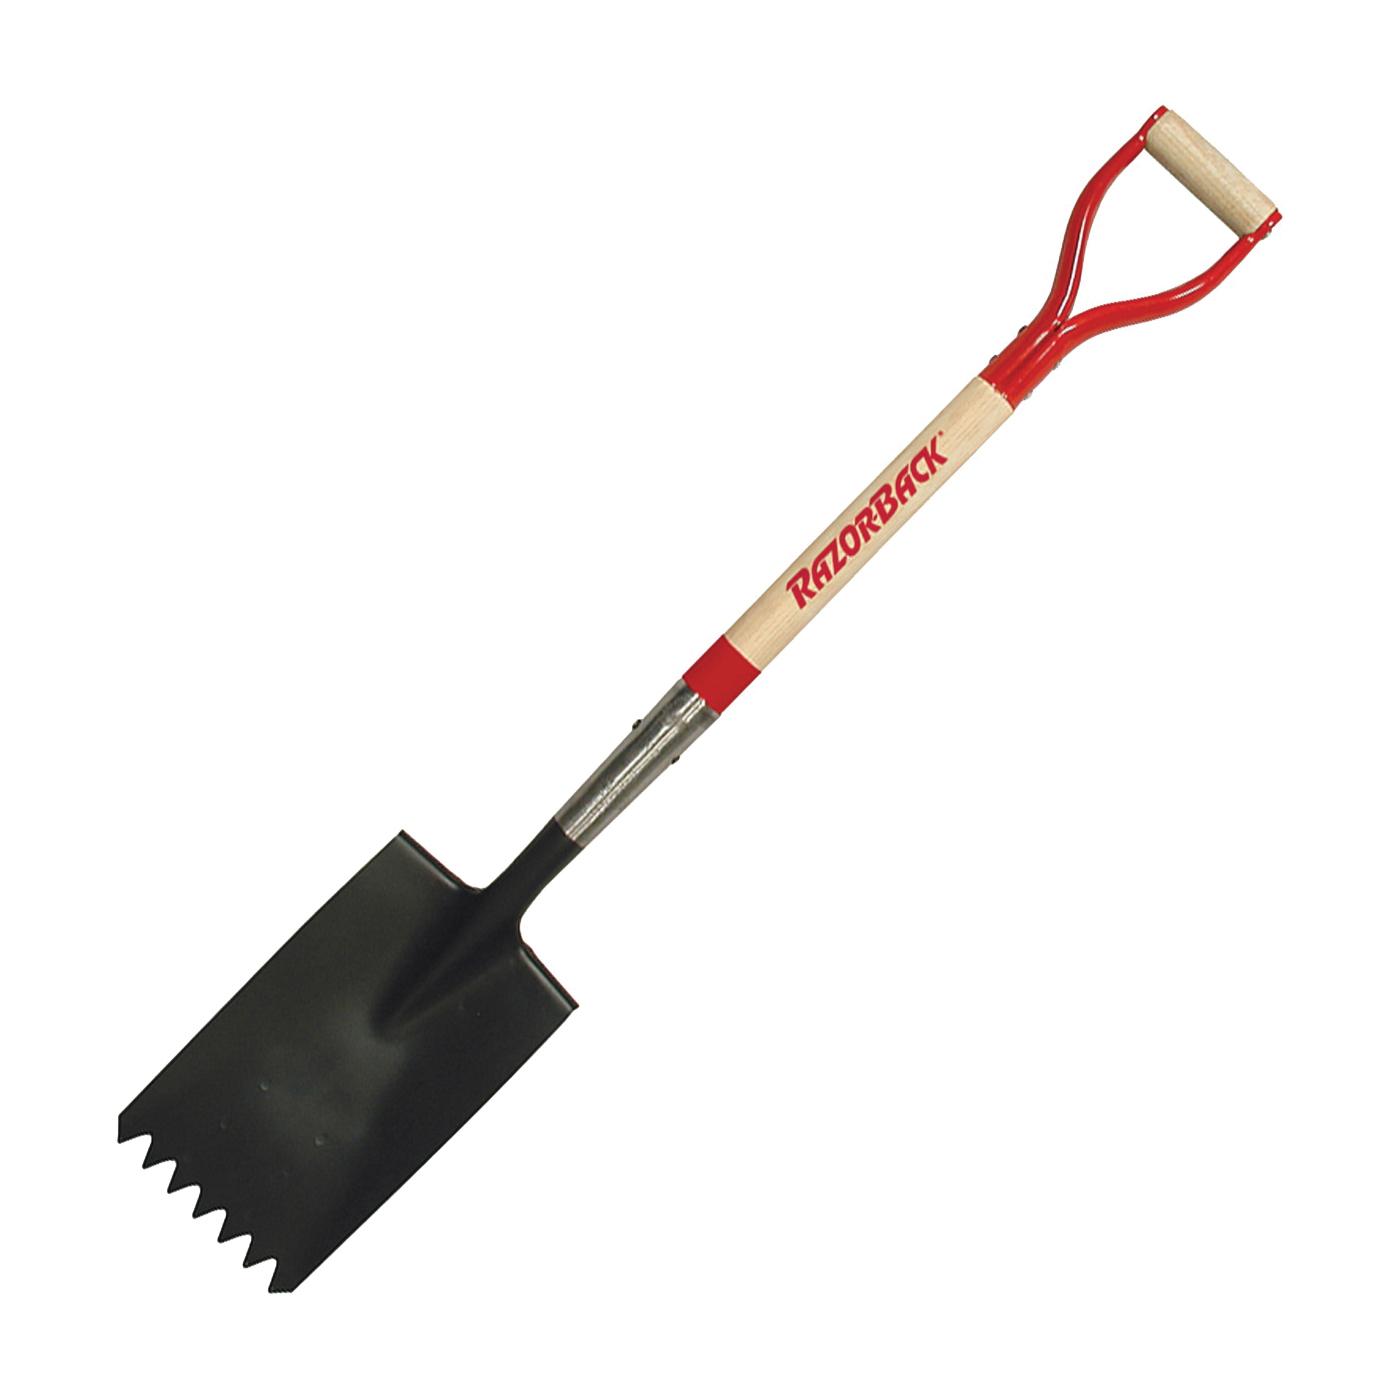 46142 Roofing Tool with Shingle Remover, Steel Blade, D-Shaped Handle, Hardwood Handle, 42 in OAL